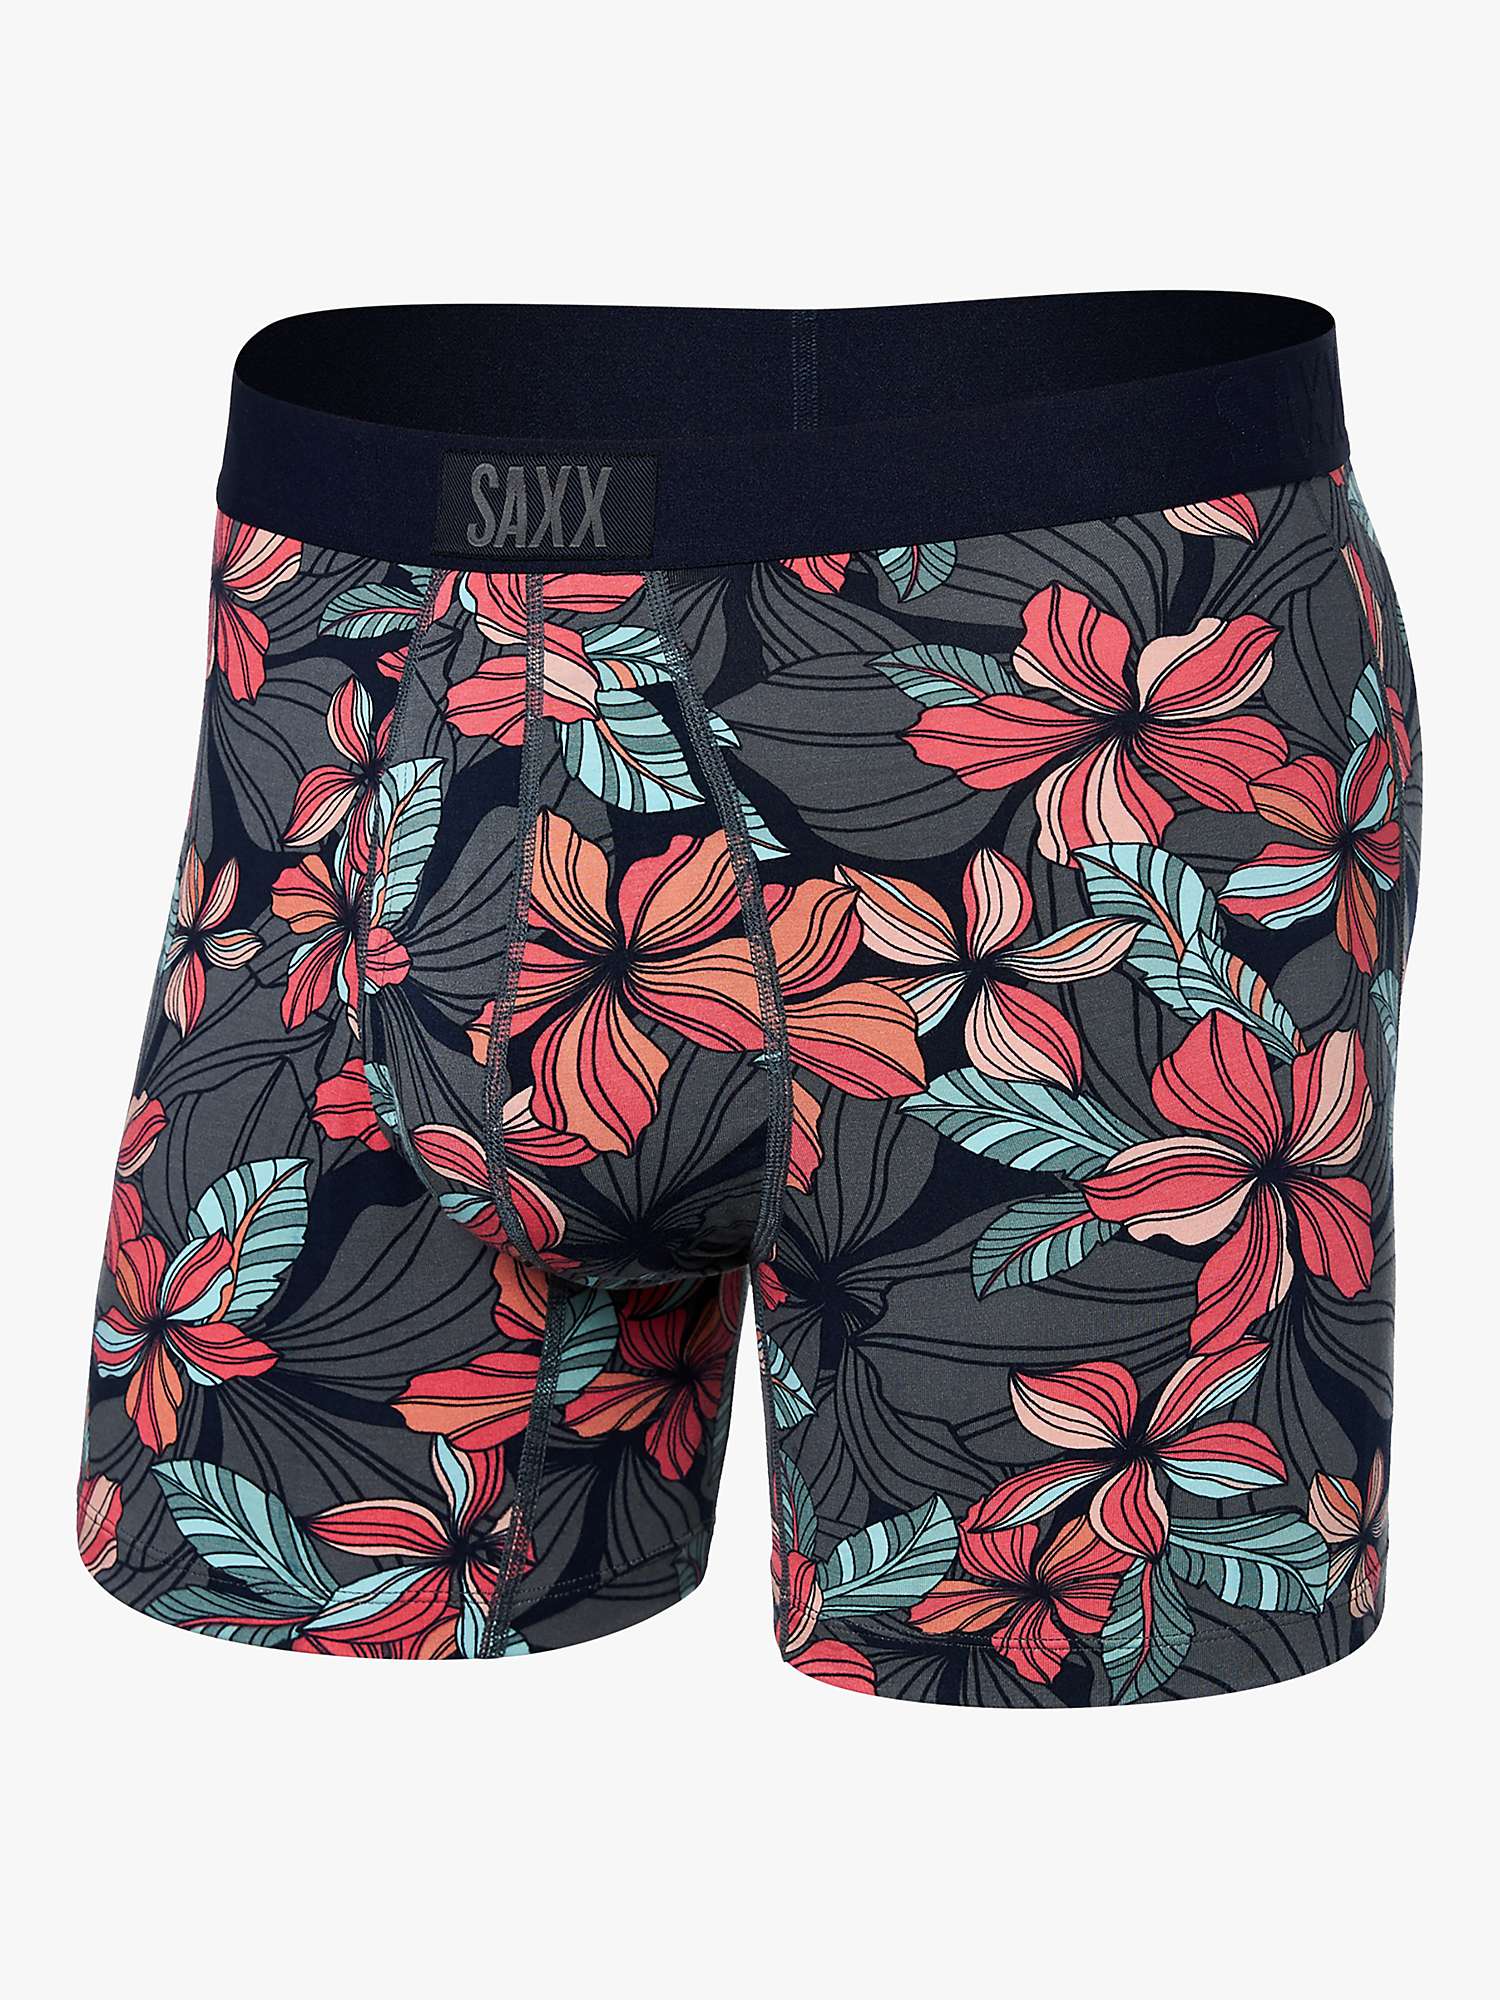 Buy SAXX Jungle Relaxed Fit Trunks, Multi Online at johnlewis.com